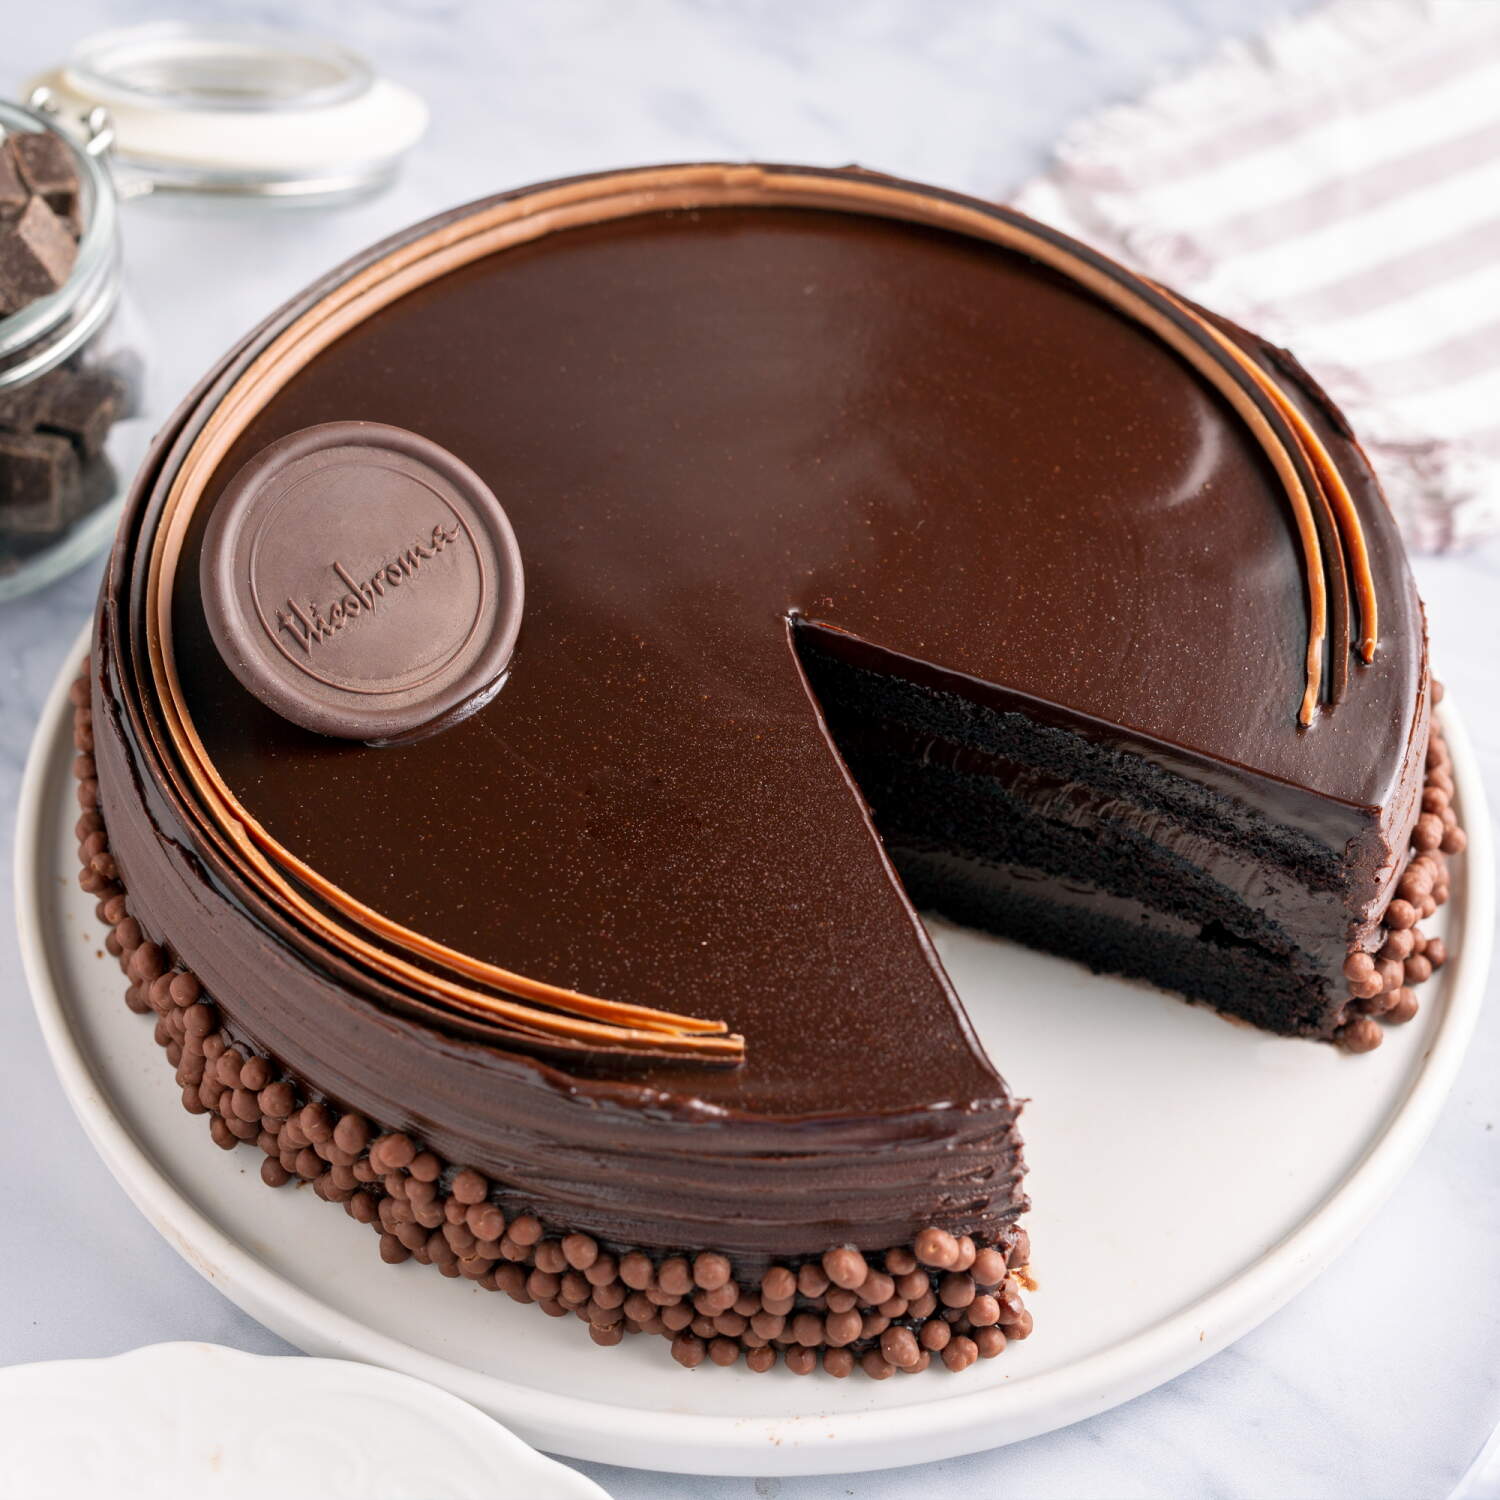 Crunchy Chocolate Sensation - Eggless Half Kg Cake | Online Cake Delivery  India to India - Flora2000